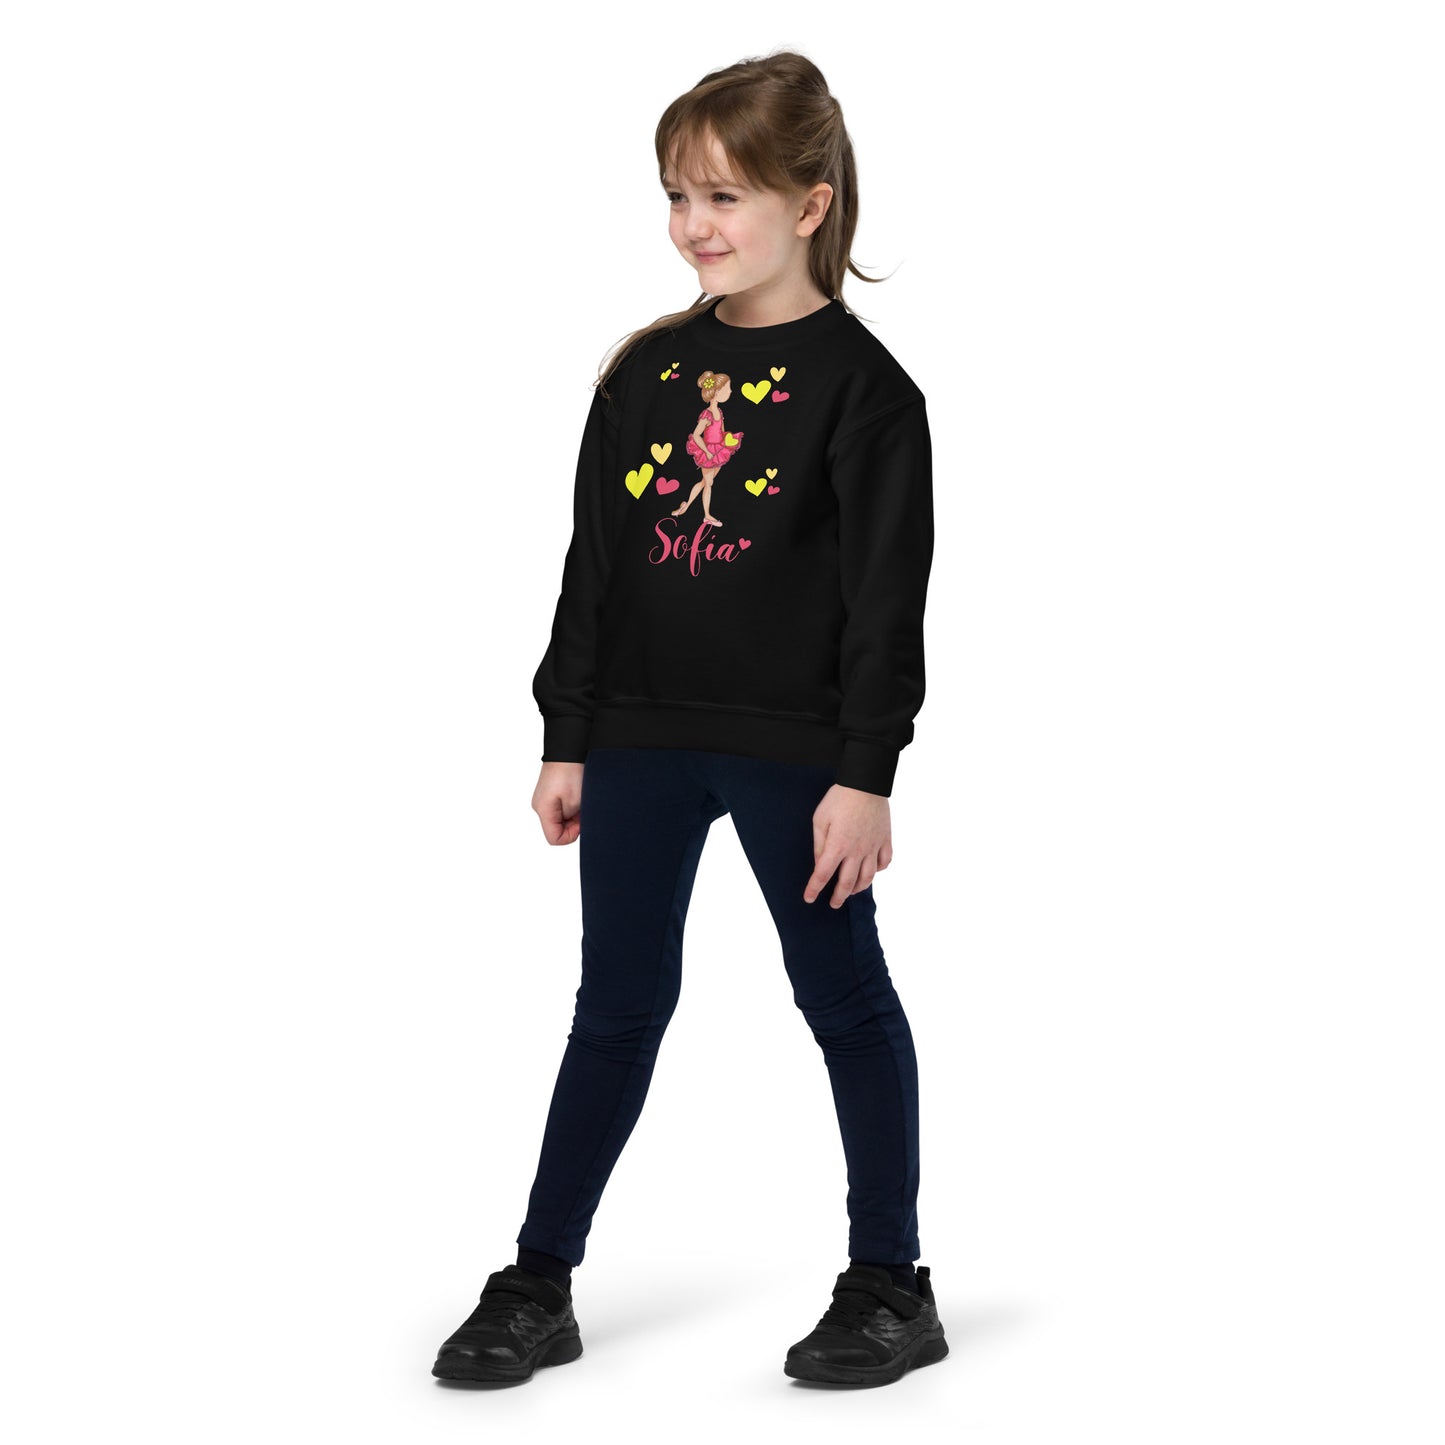 a young girl wearing a black sweatshirt with a cartoon character on it